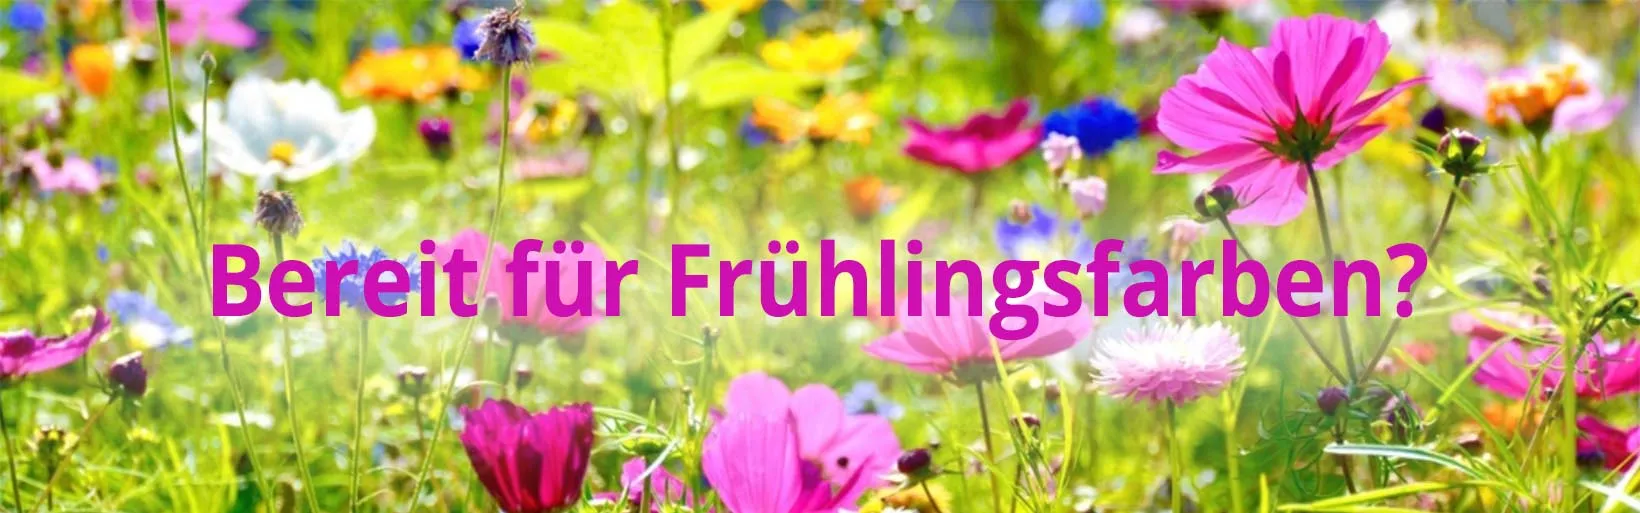 Frühling in Farbe